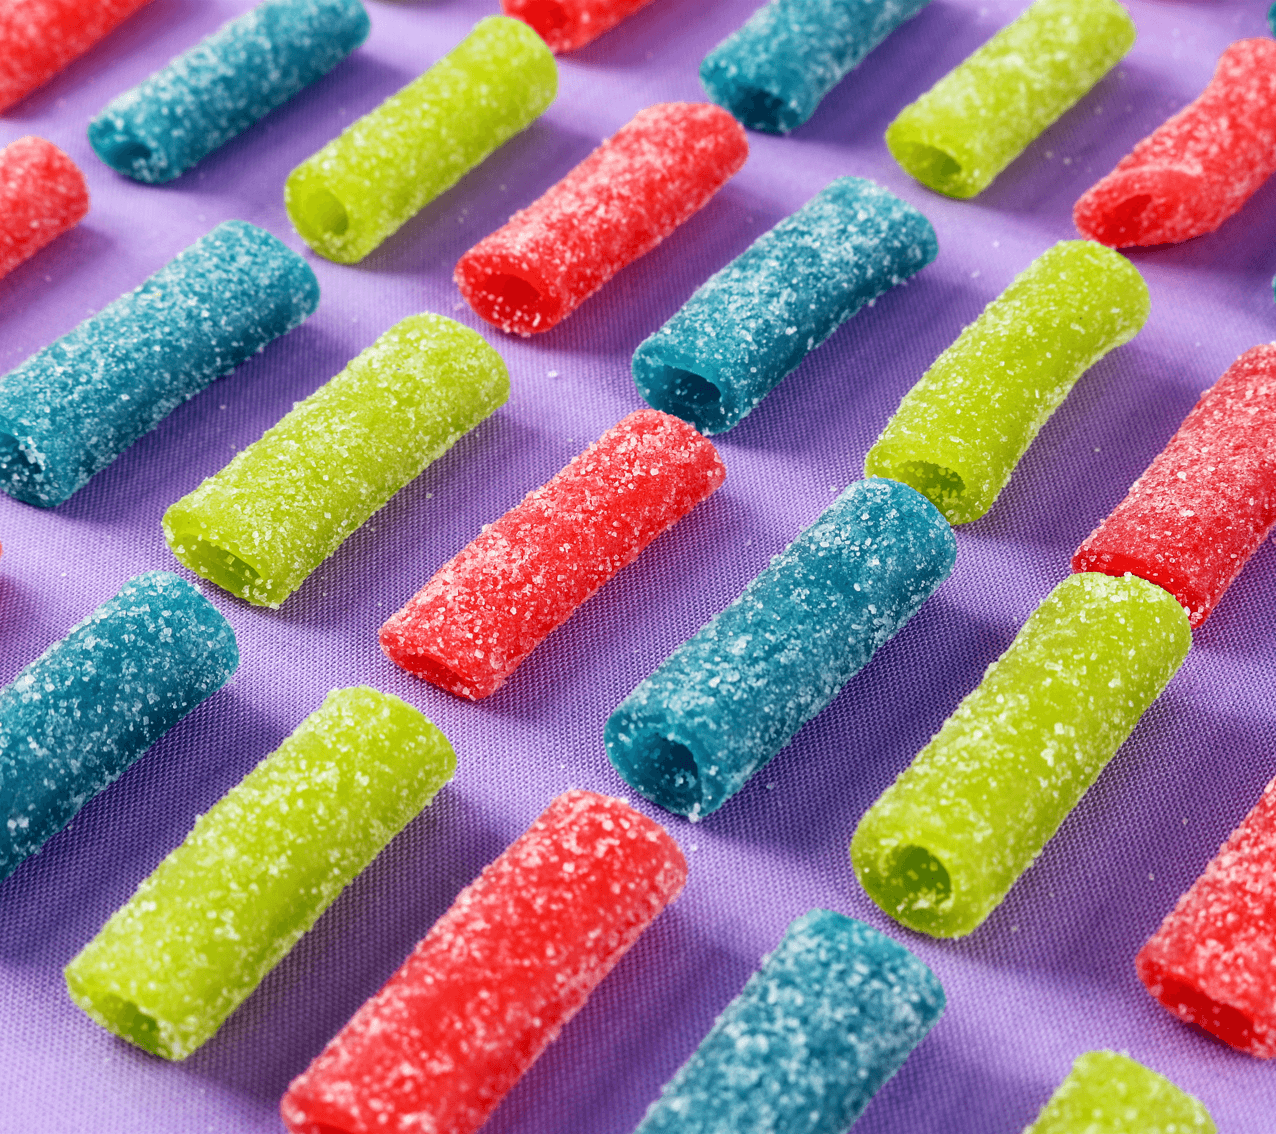 Sour sugar coated strawberry, blue raspberry, and green apple bites lined up and ready to eat